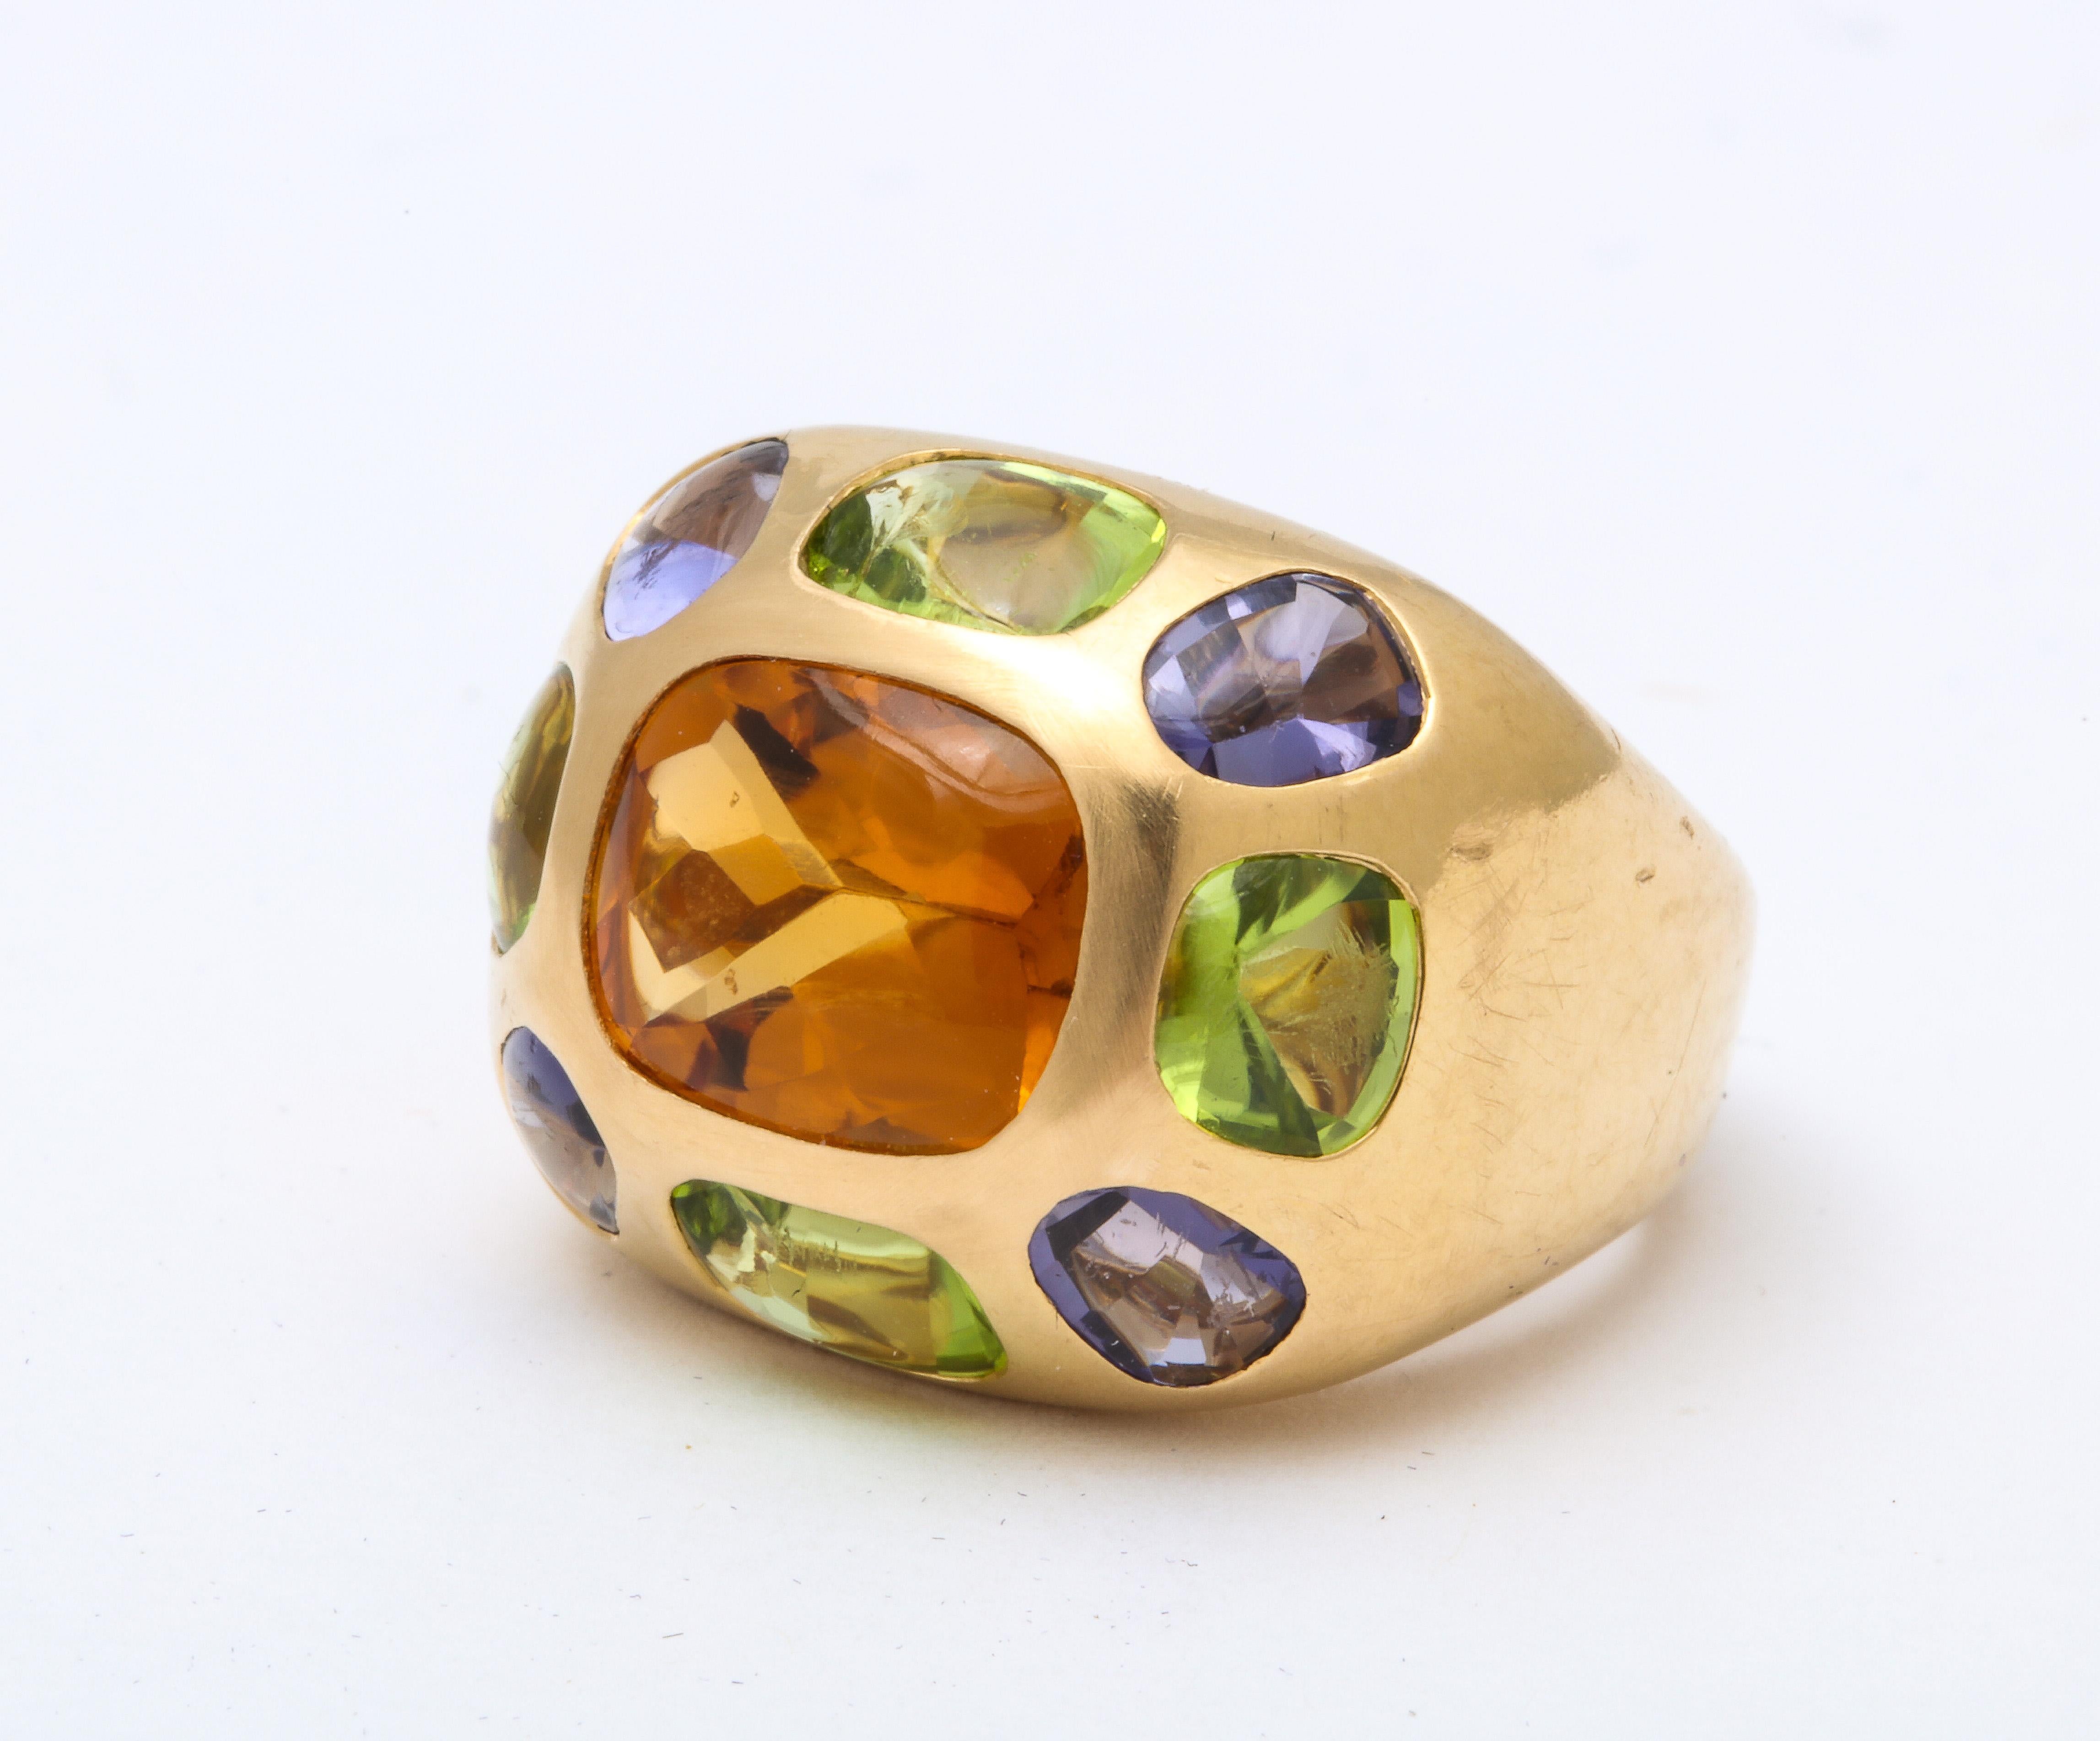 This fabulous vintage Chanel ring  has a  citrine center stone with smaller semi precious stones including peridot and iolite, all invisibly se,t in a classic mounting of 18 K gold.  It has authentic Chanel Paris hallmarks  and was  made in